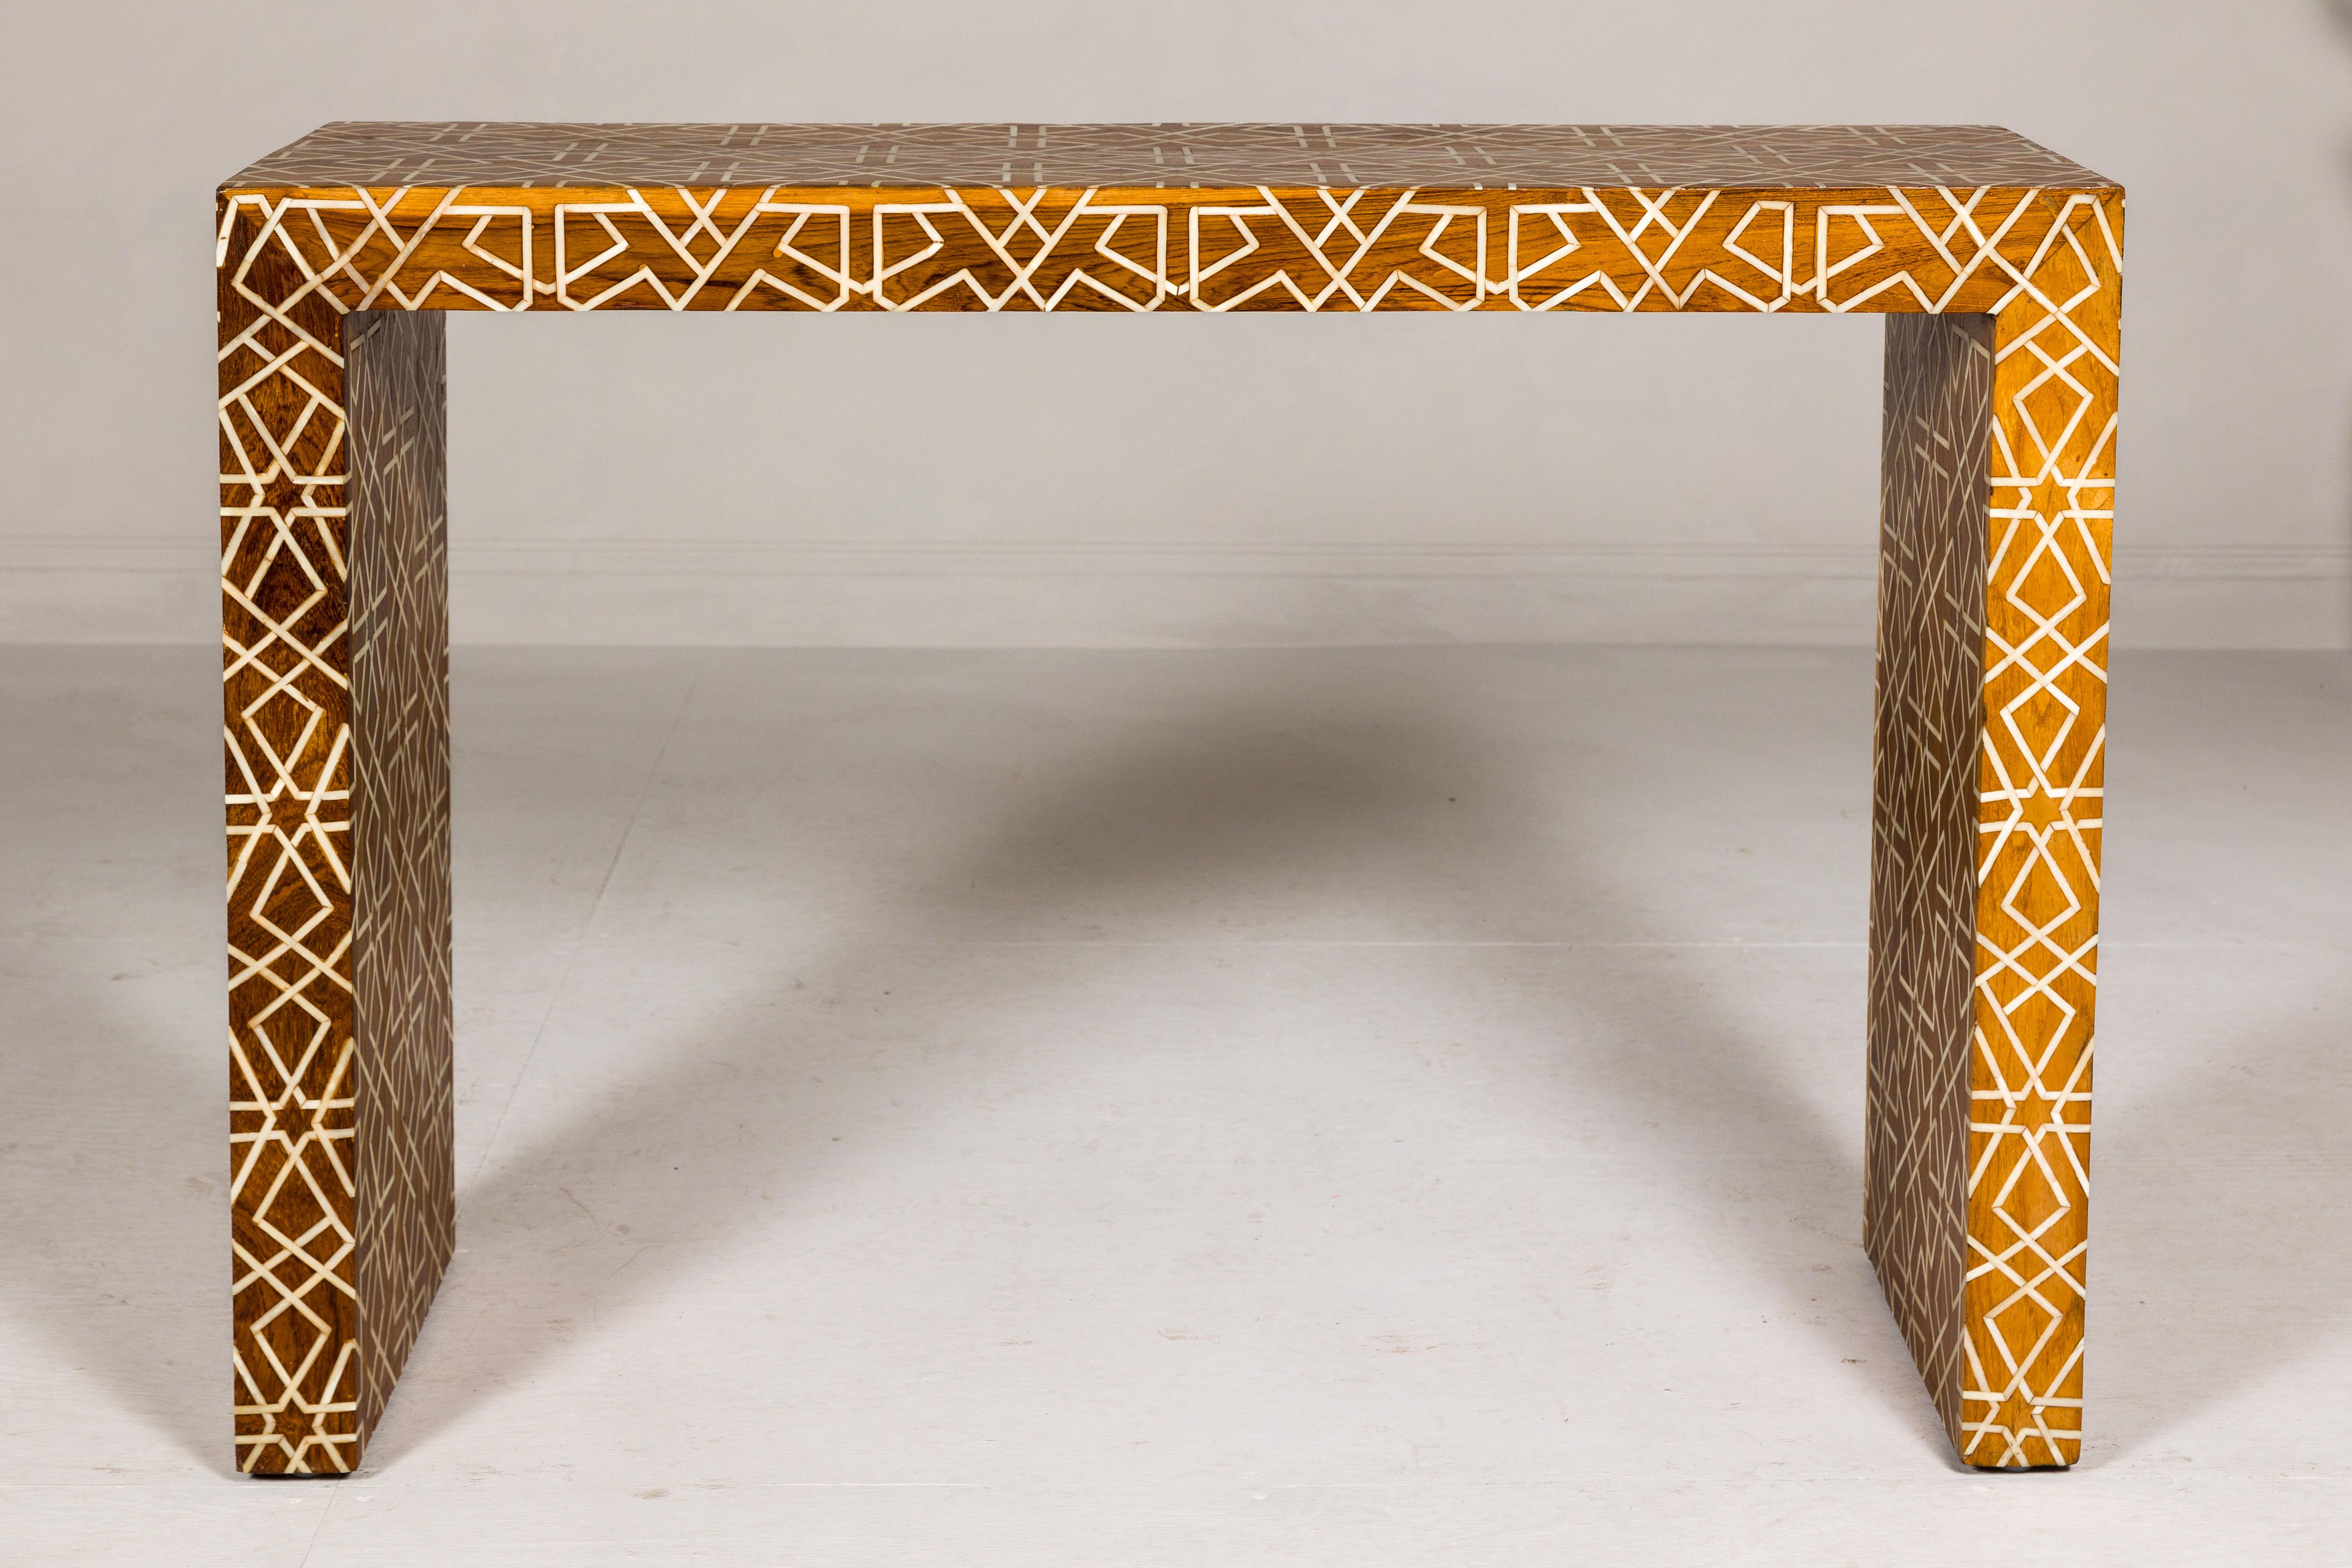 Handmade Mango Wood Linear Console Table with Geometric Bone Inlay In Good Condition For Sale In Yonkers, NY